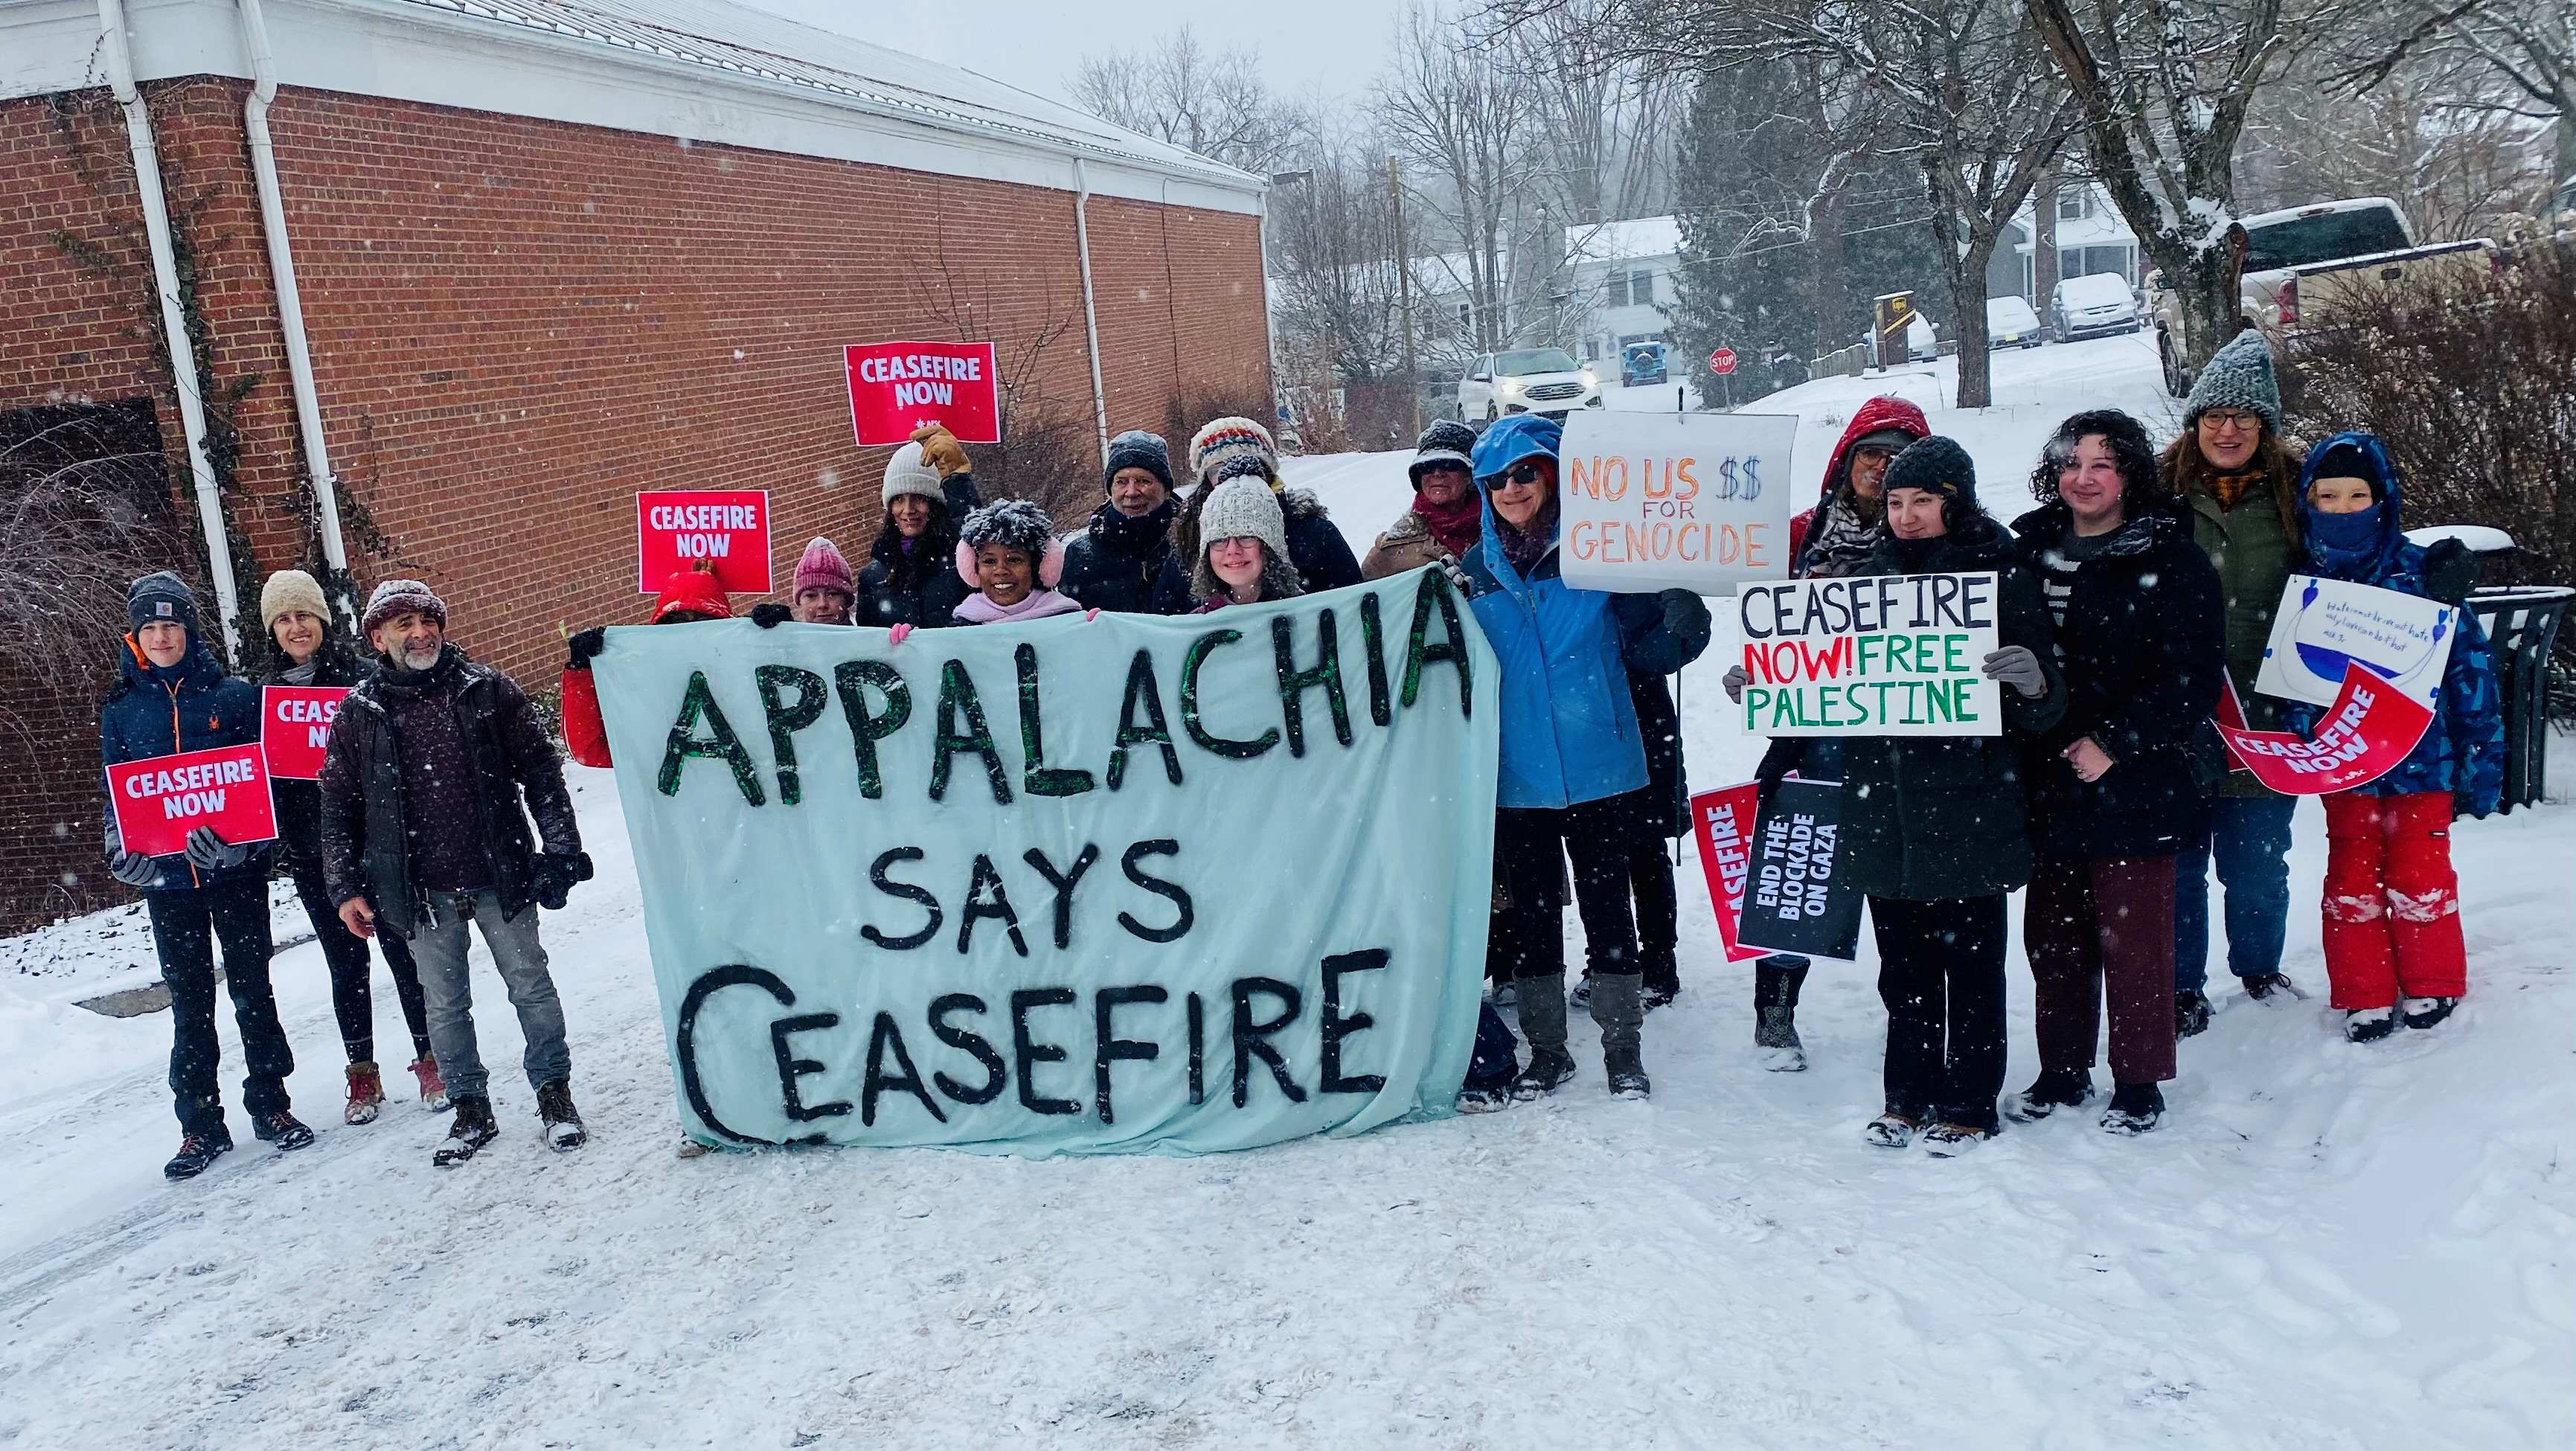 People in the snow with a painted banner that reads 'Appalachia Says Ceasefire'